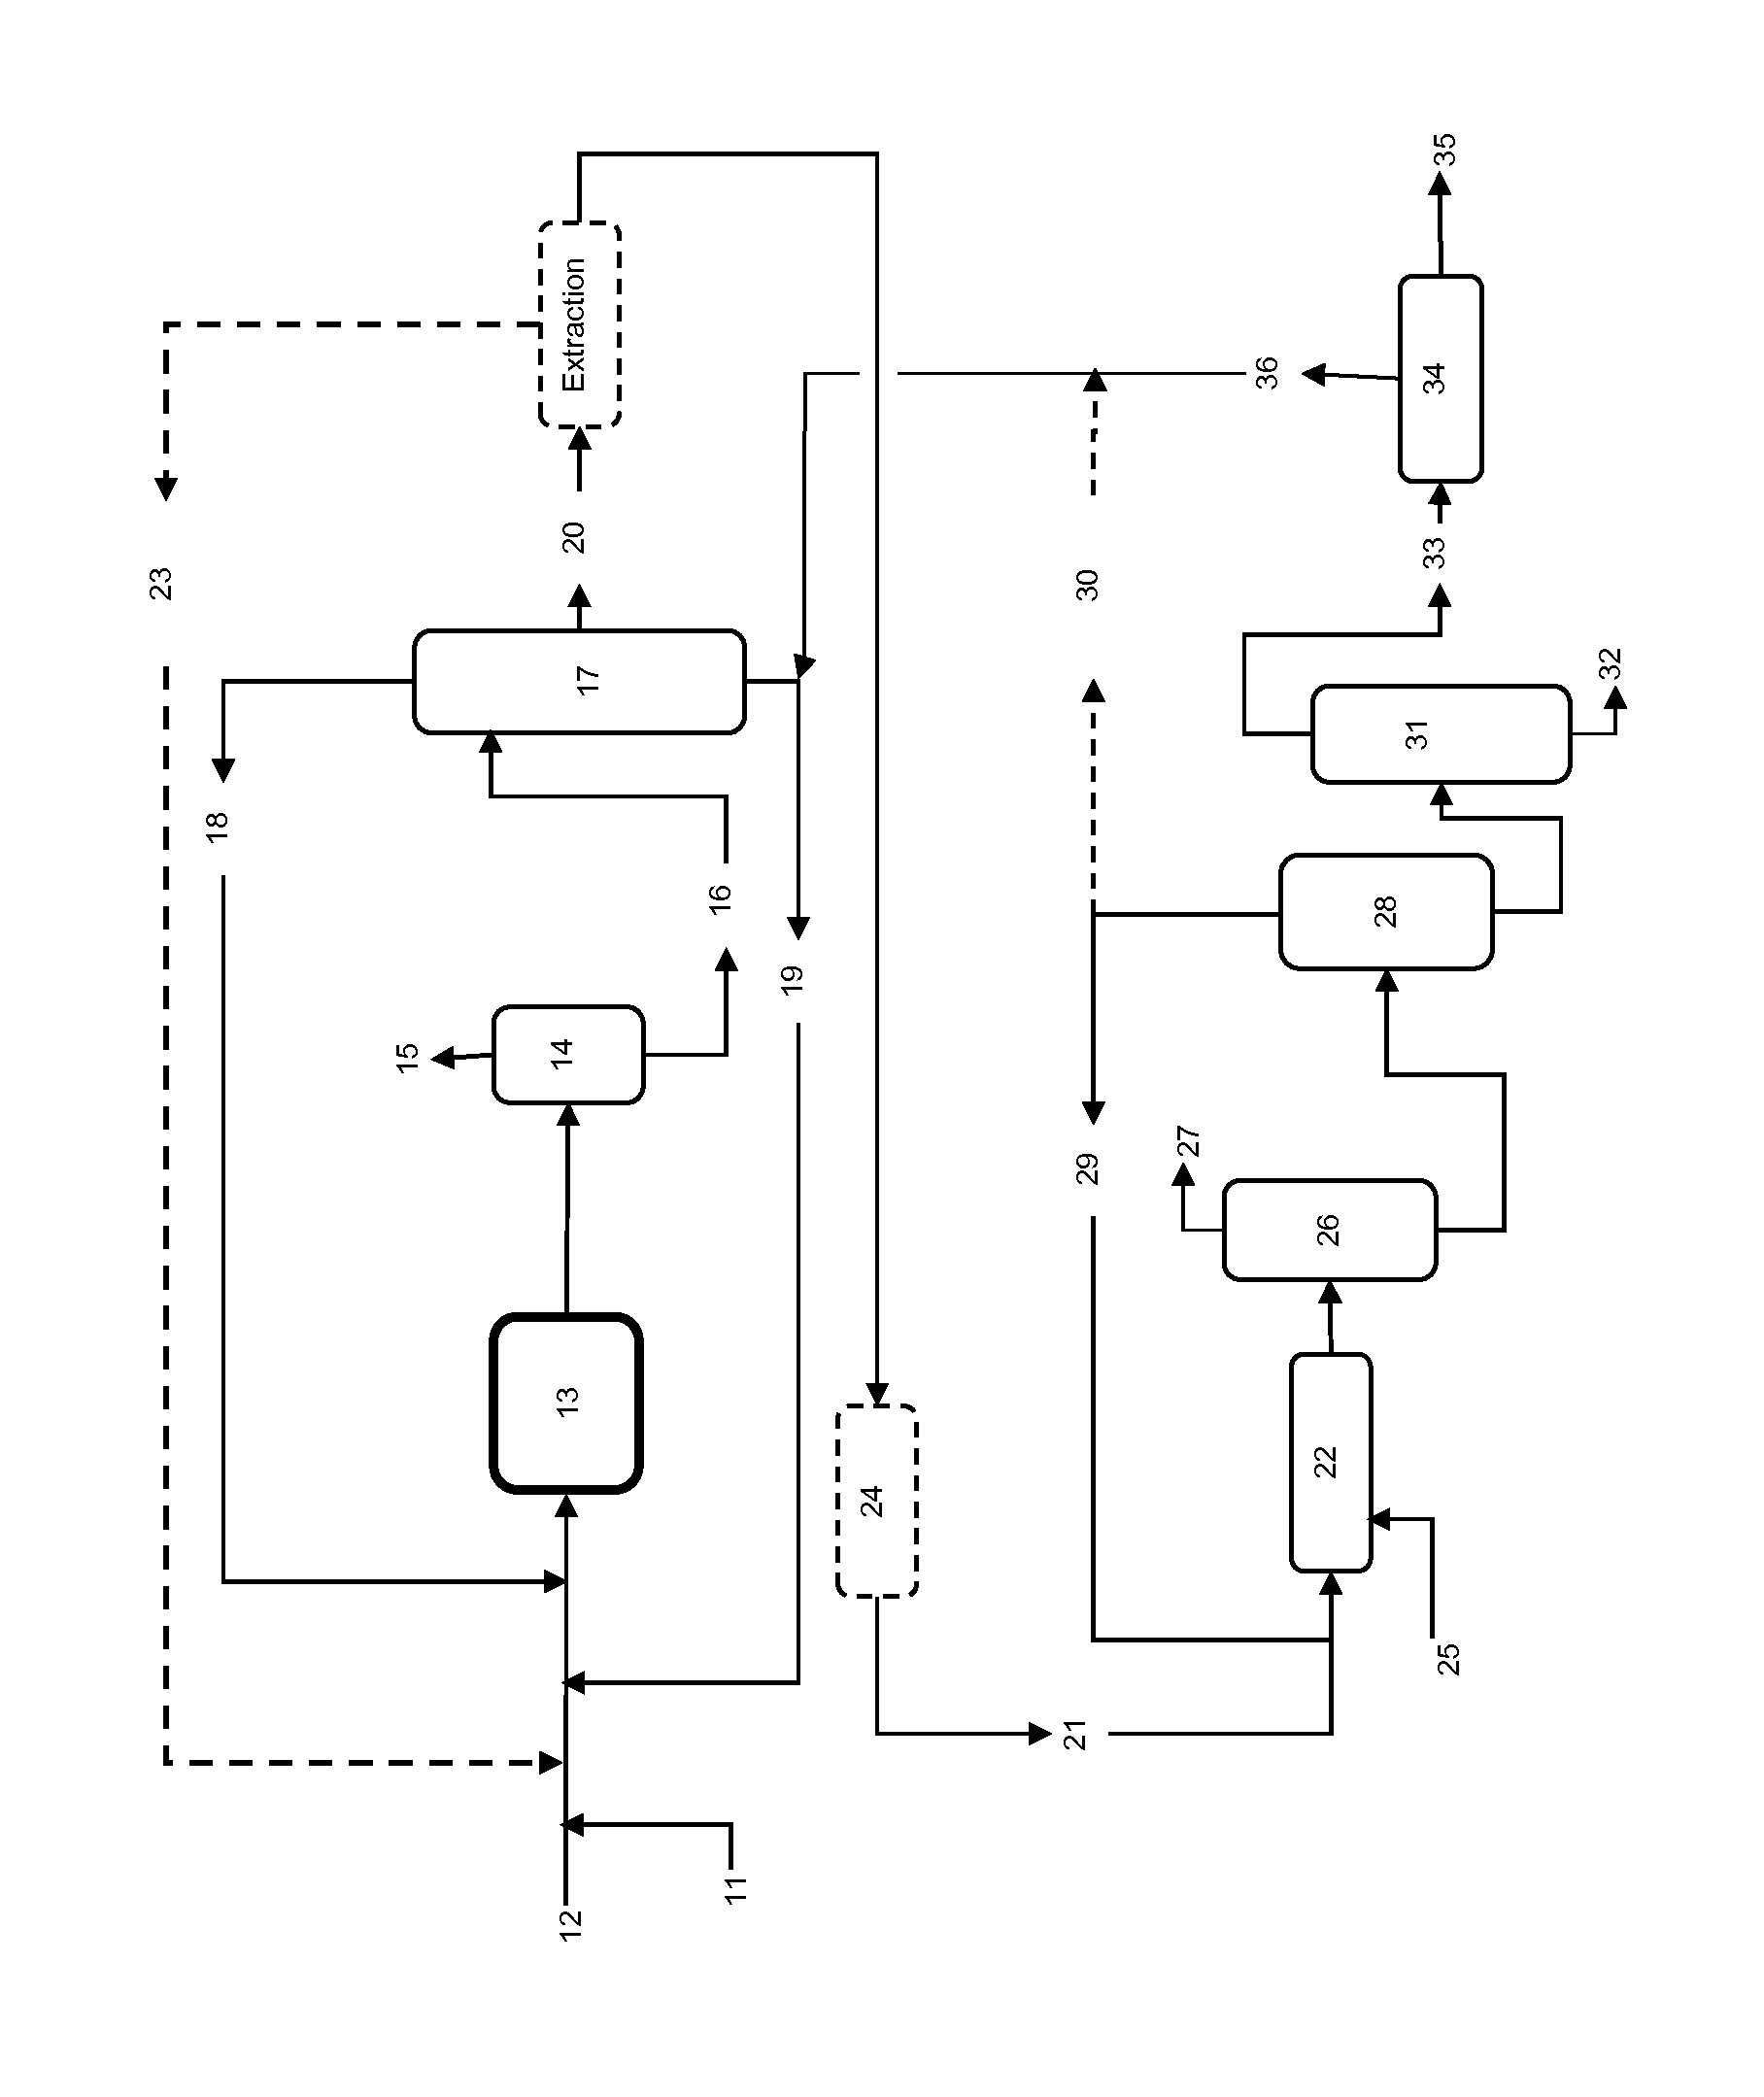 Process for the production of xylenes and light olefins